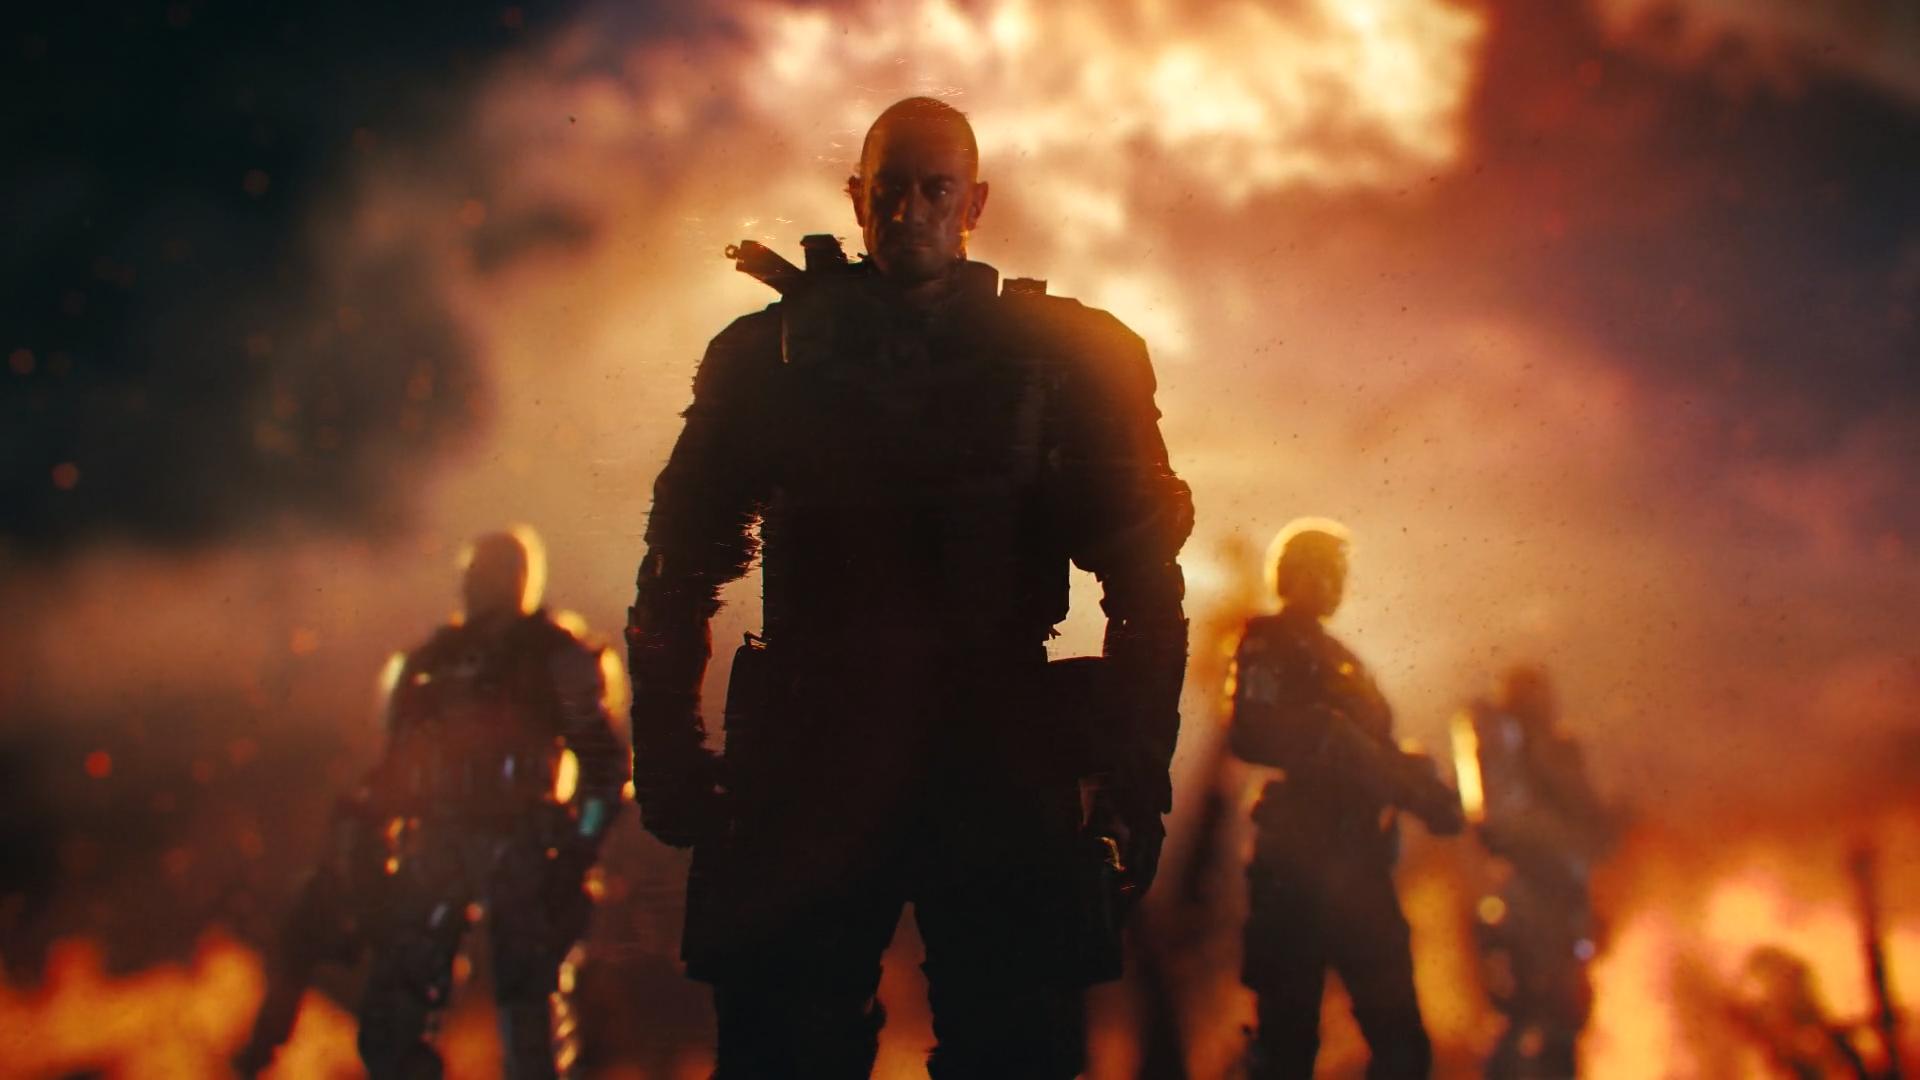 Call Of Duty Black Ops 3 Campaign - 1920x1080 Wallpaper 